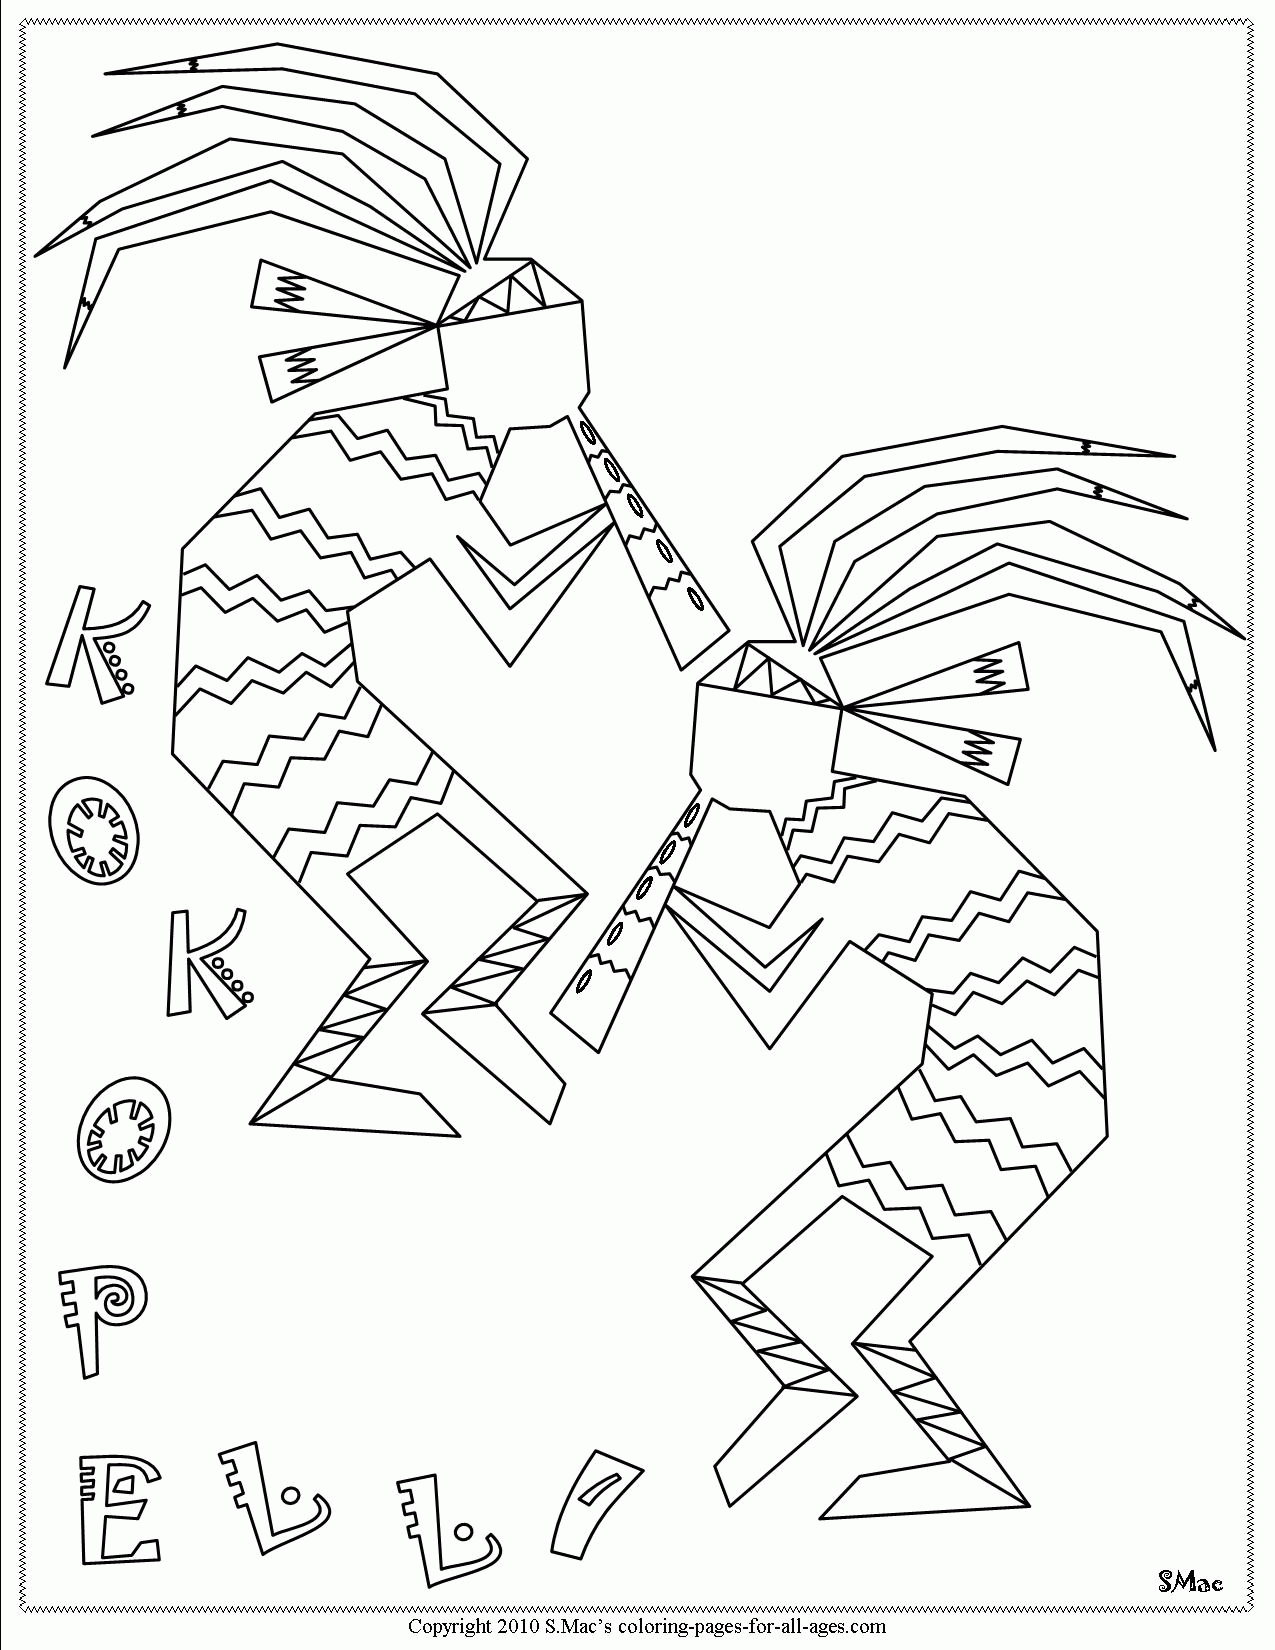 Printable Nm Pottery Coloring Pages - Coloring Home